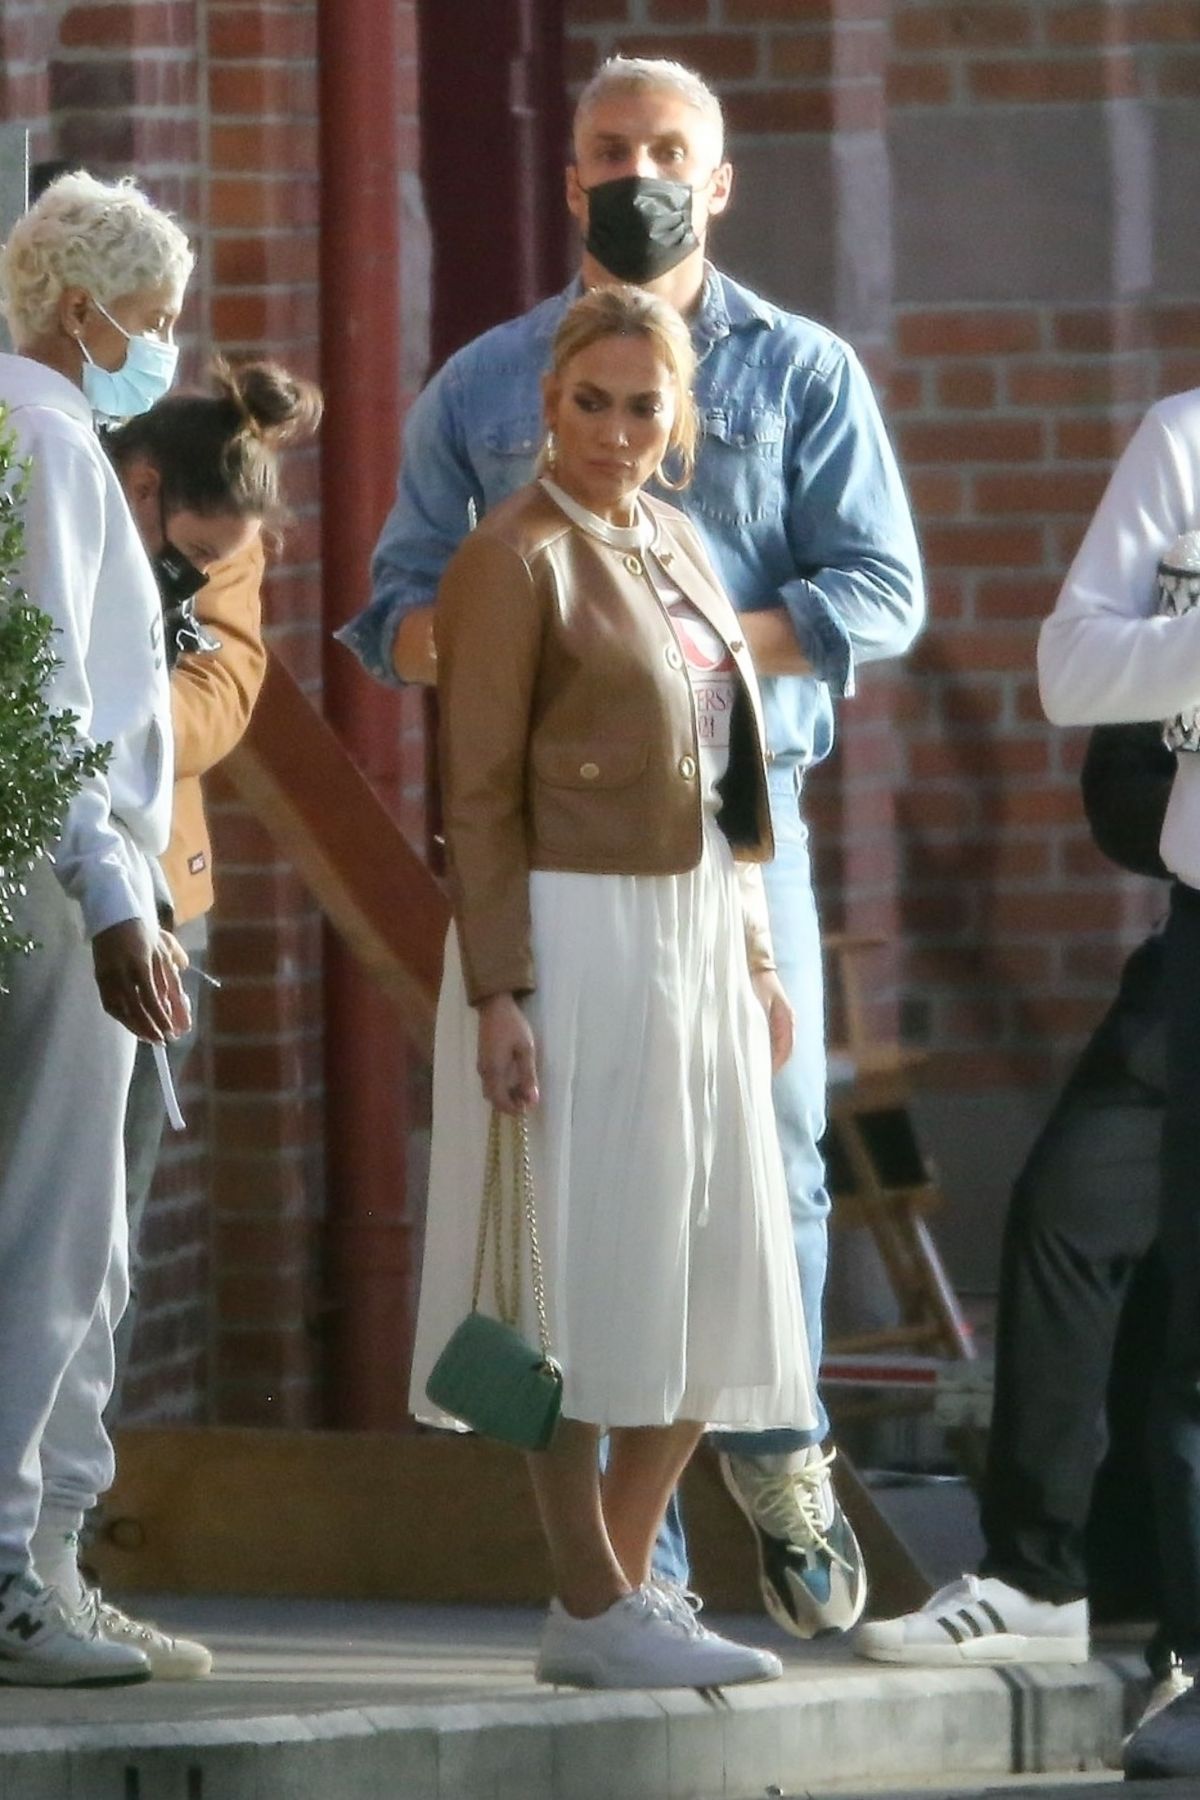 jennifer-lopez-at-a-photoshoot-in-los-angeles-11-11-2020-10.jpg